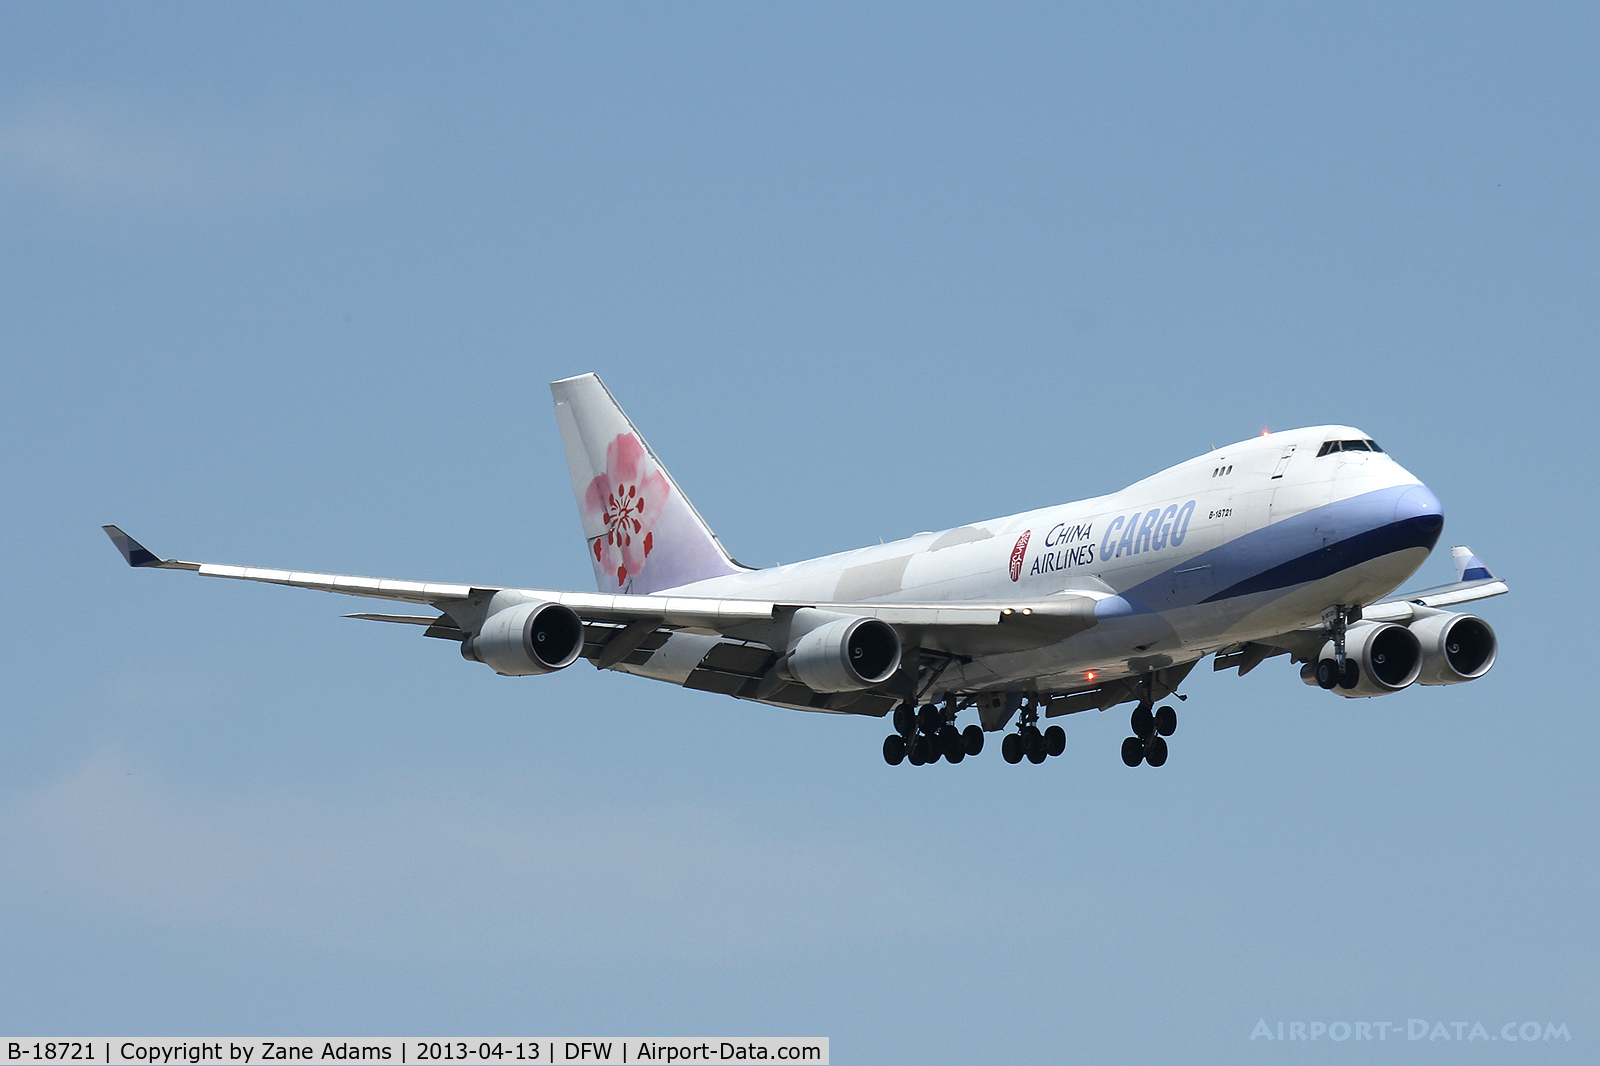 B-18721, 2005 Boeing 747-409F/SCD C/N 33738, China Airlines Cargo at DFW Airport